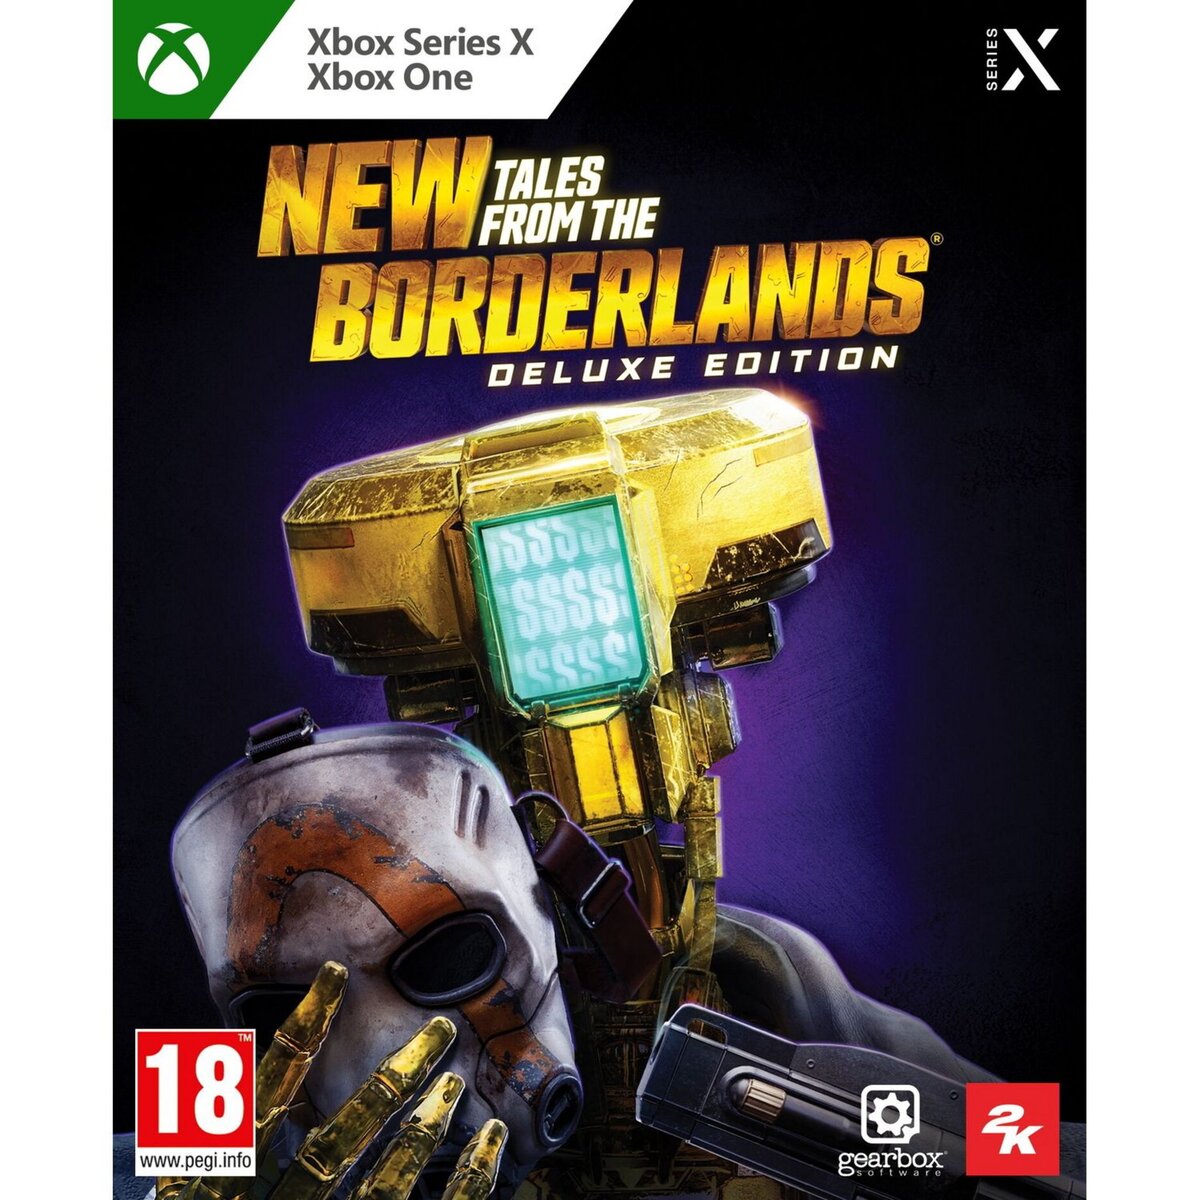 New Tales From the Borderlands - Deluxe Edition Xbox Series X - Xbox One